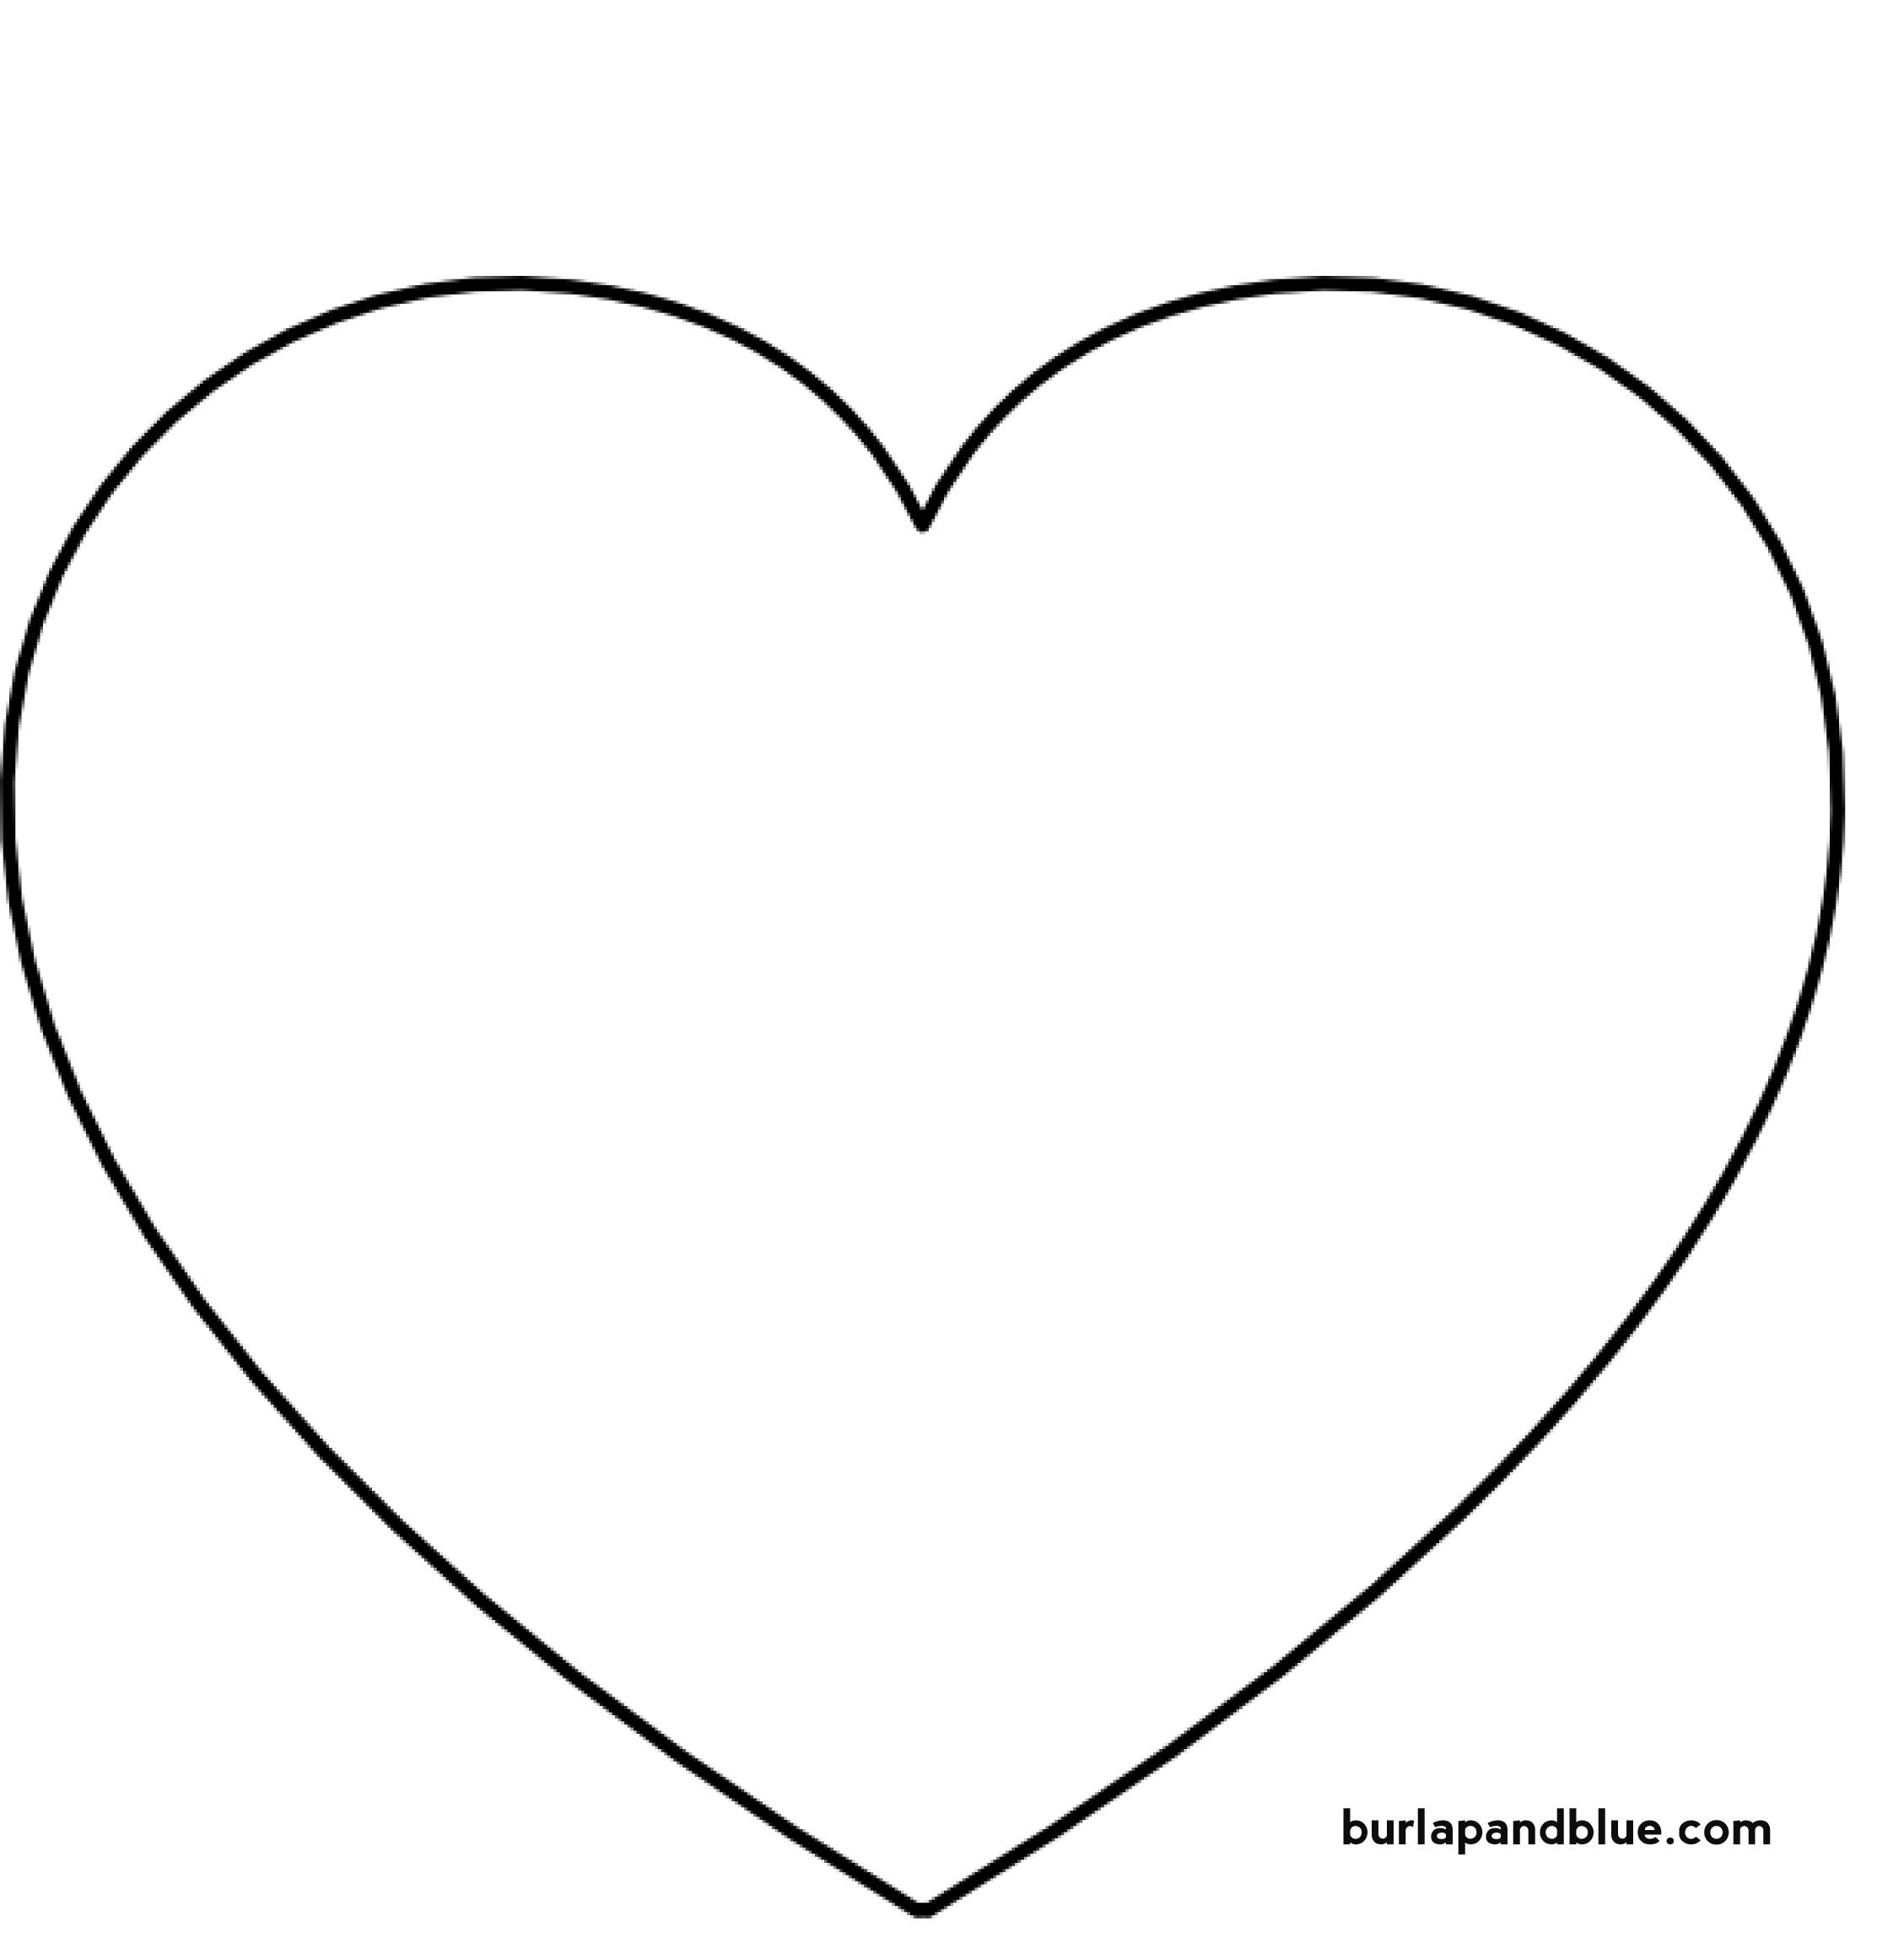 Heart Template and Outlines (Free Templates for Sewing and Crafts)